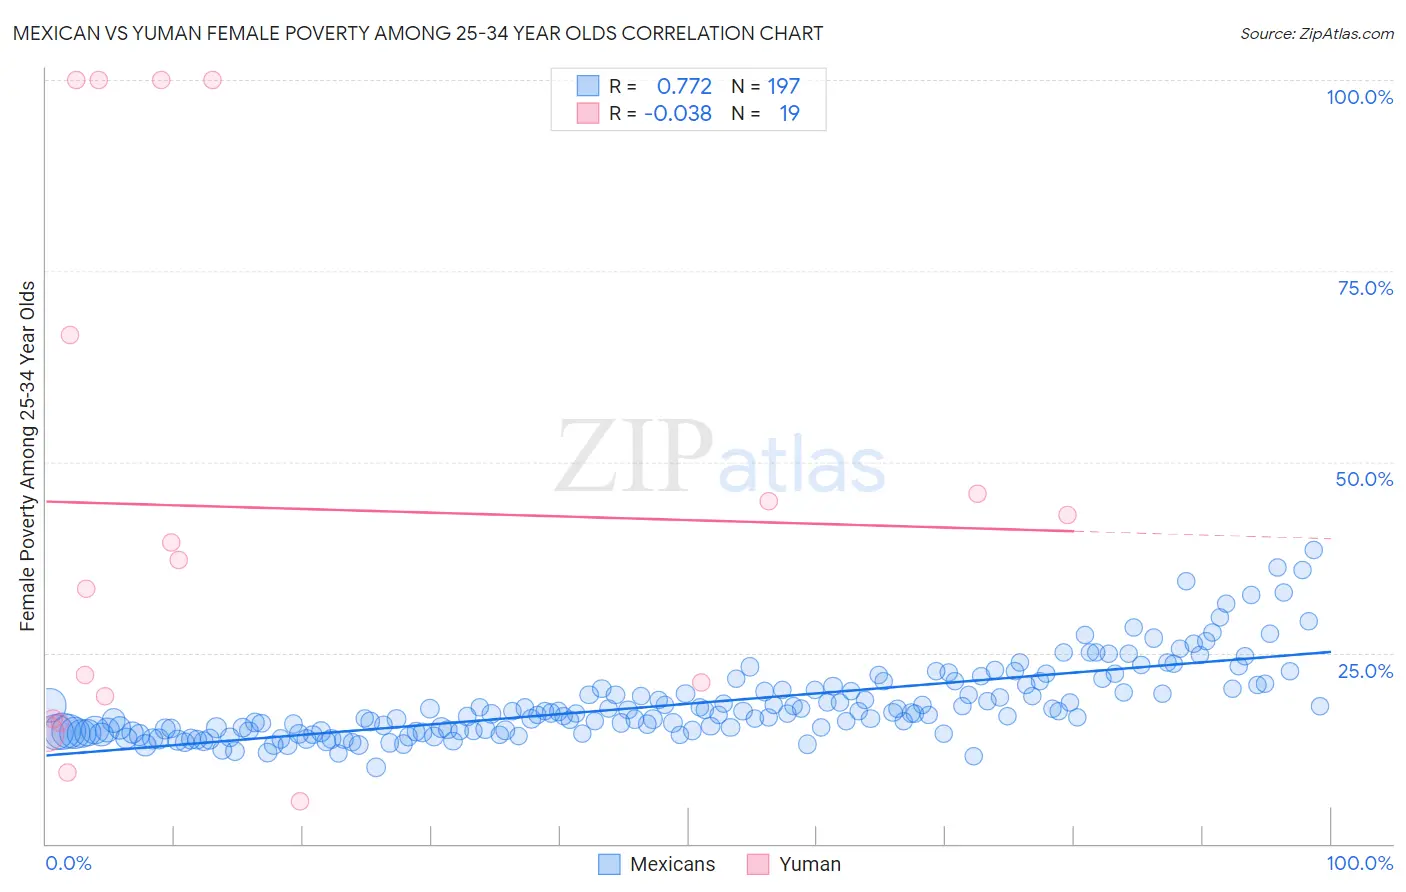 Mexican vs Yuman Female Poverty Among 25-34 Year Olds